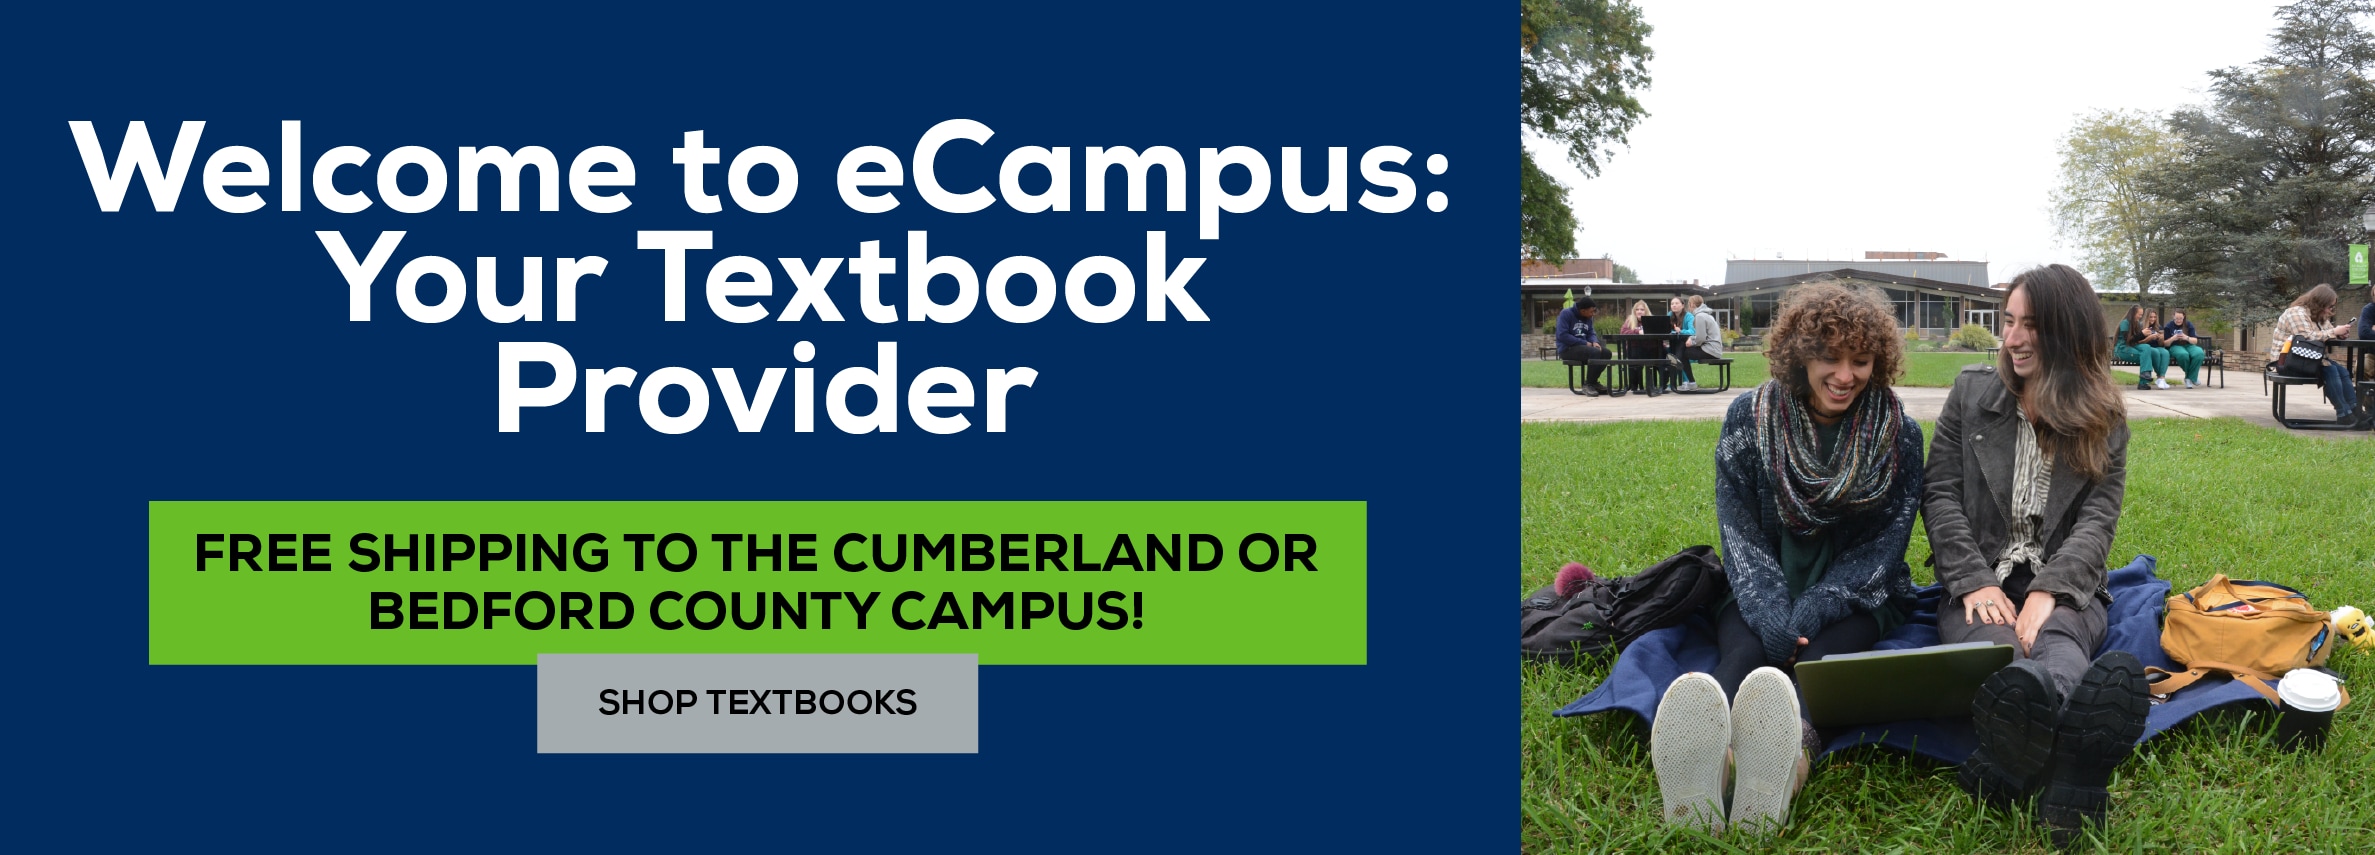 Welcome to eCampus: Your Textbook Provider. Free shipping to the Cumberland or Bedford County Campus! Shop Textbooks